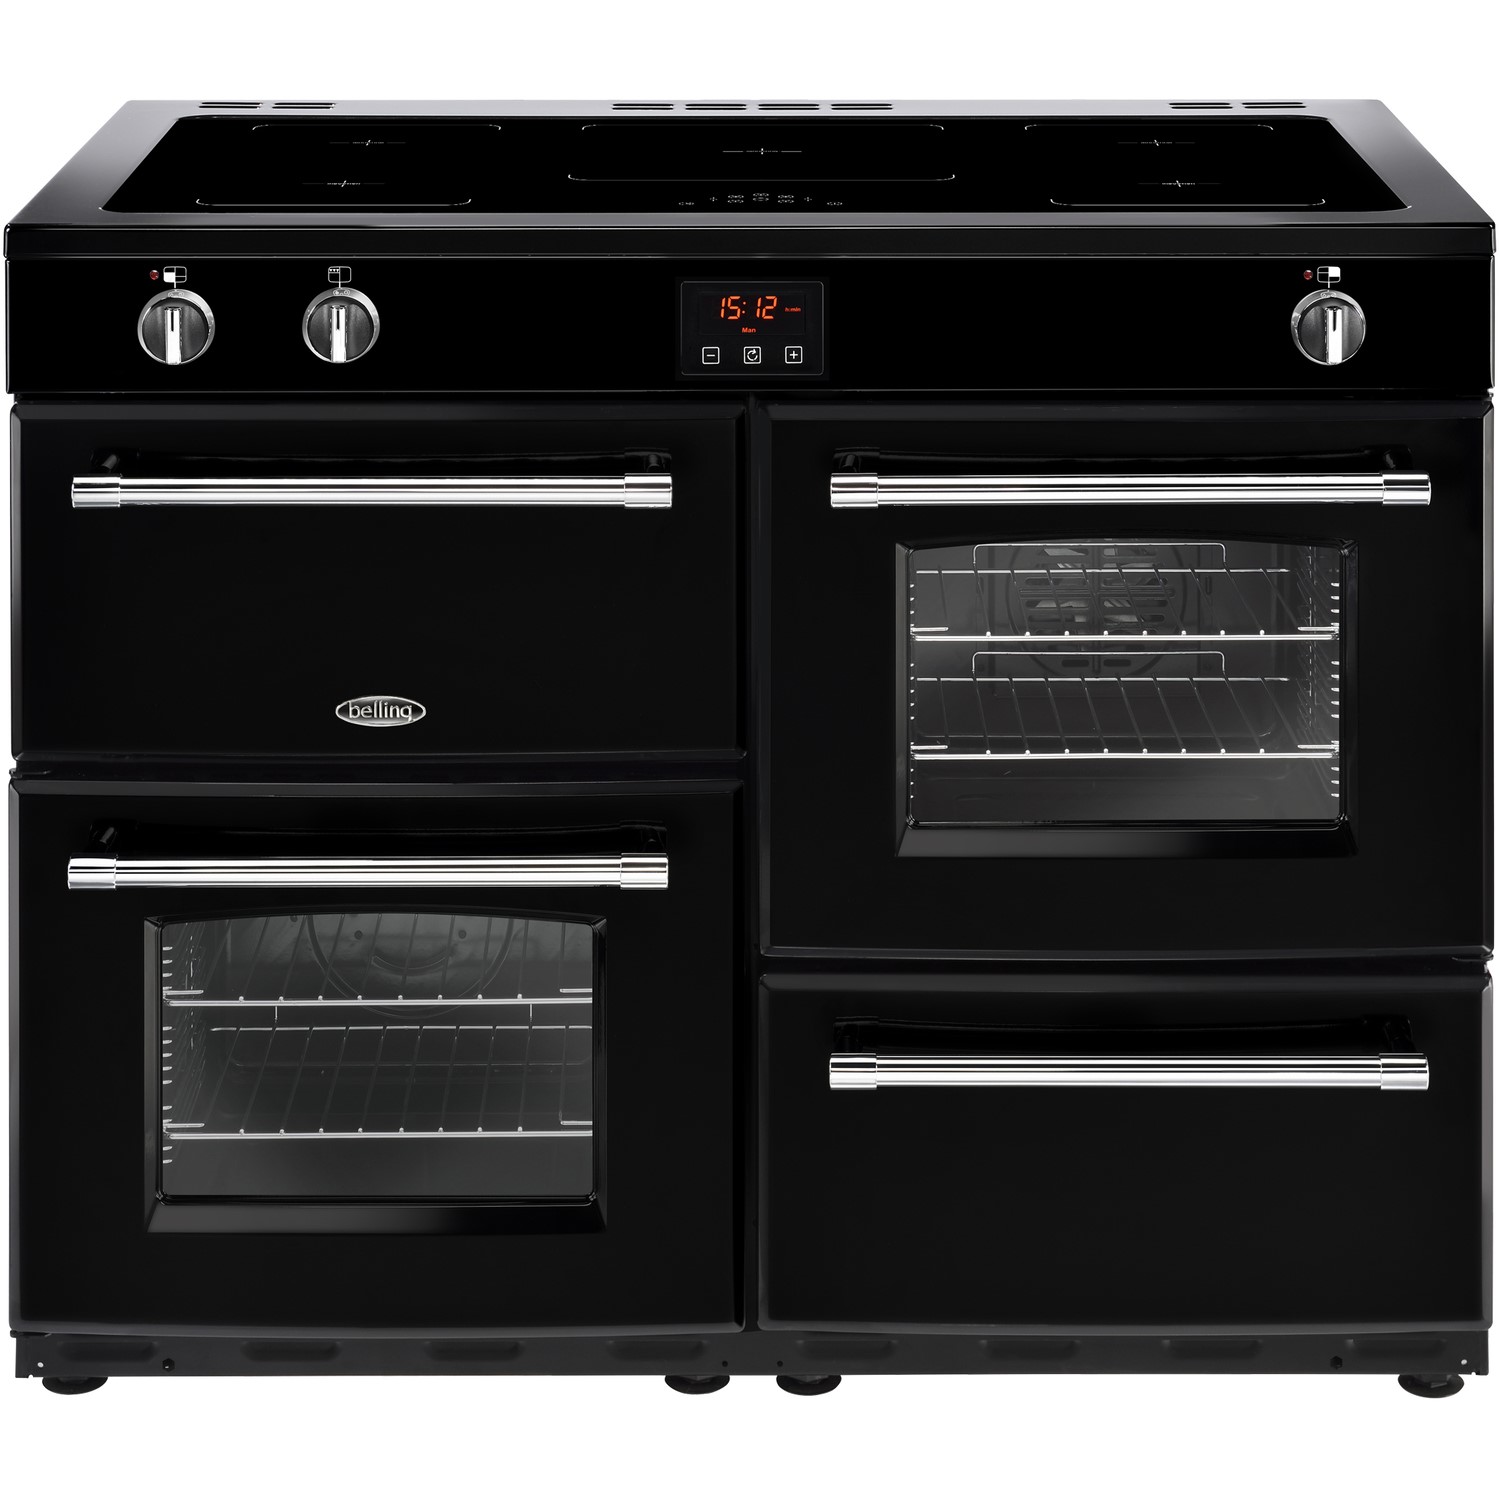 Belling Farmhouse 110Ei 110cm Electric Range Cooker with Induction Hob - Black